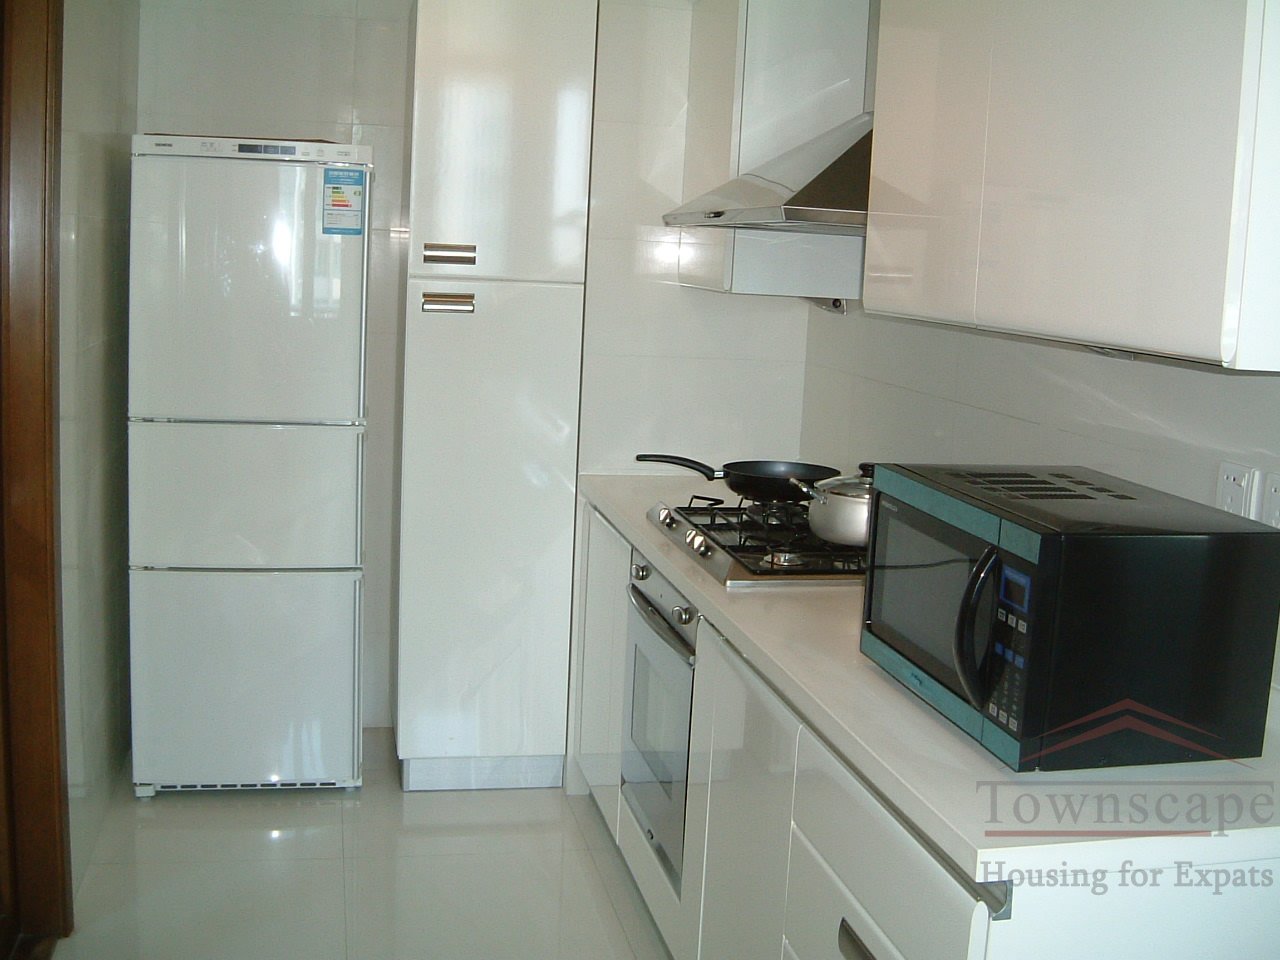 3br apartment Pudong Modern 3BR Apartment in Pudong, next to Century Park